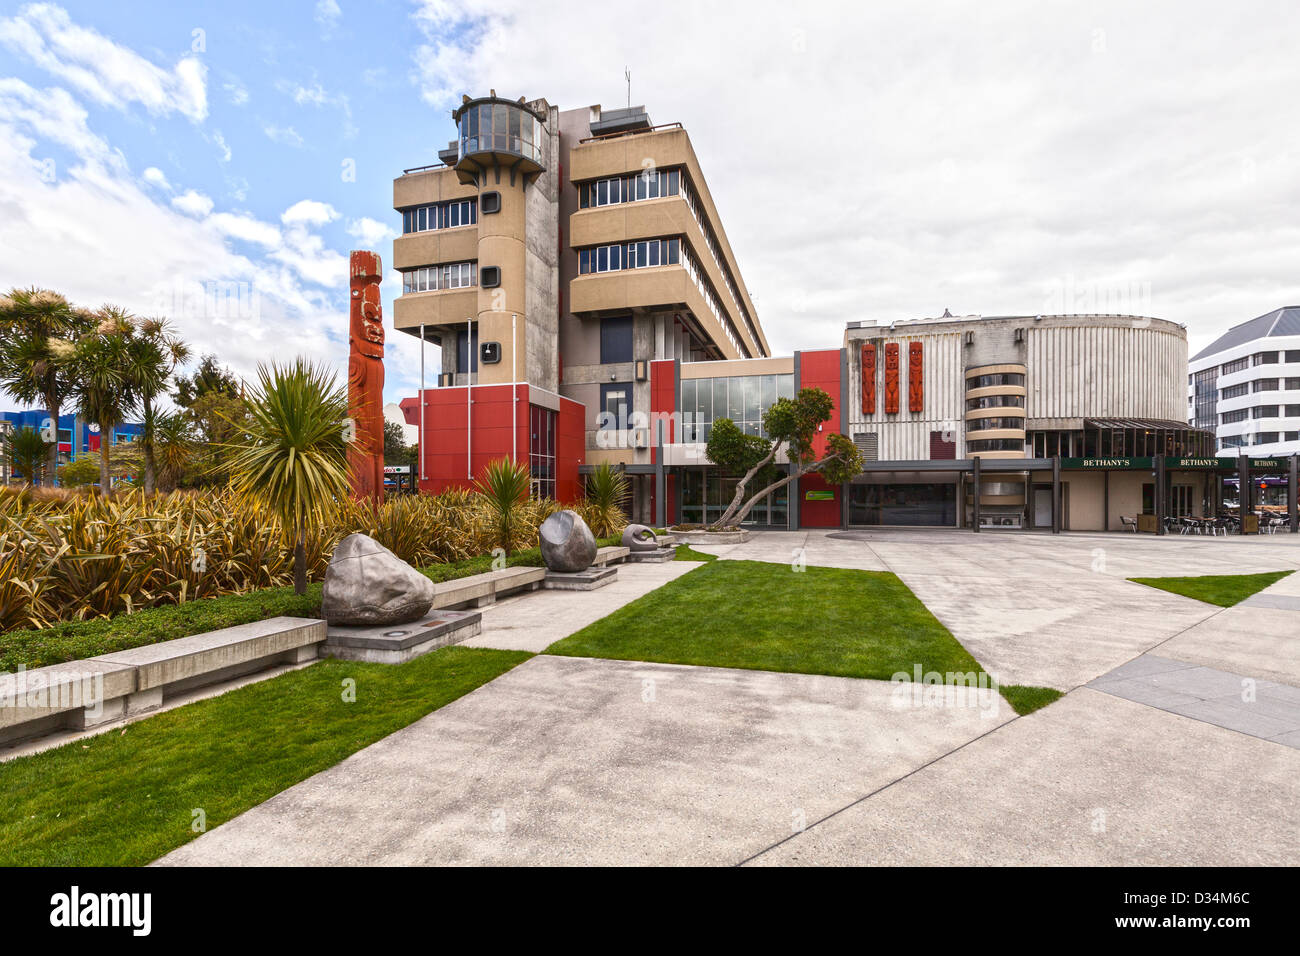 The Square, Palmerston North, Manawatu, New Zealand, with the City Council offices. Stock Photo